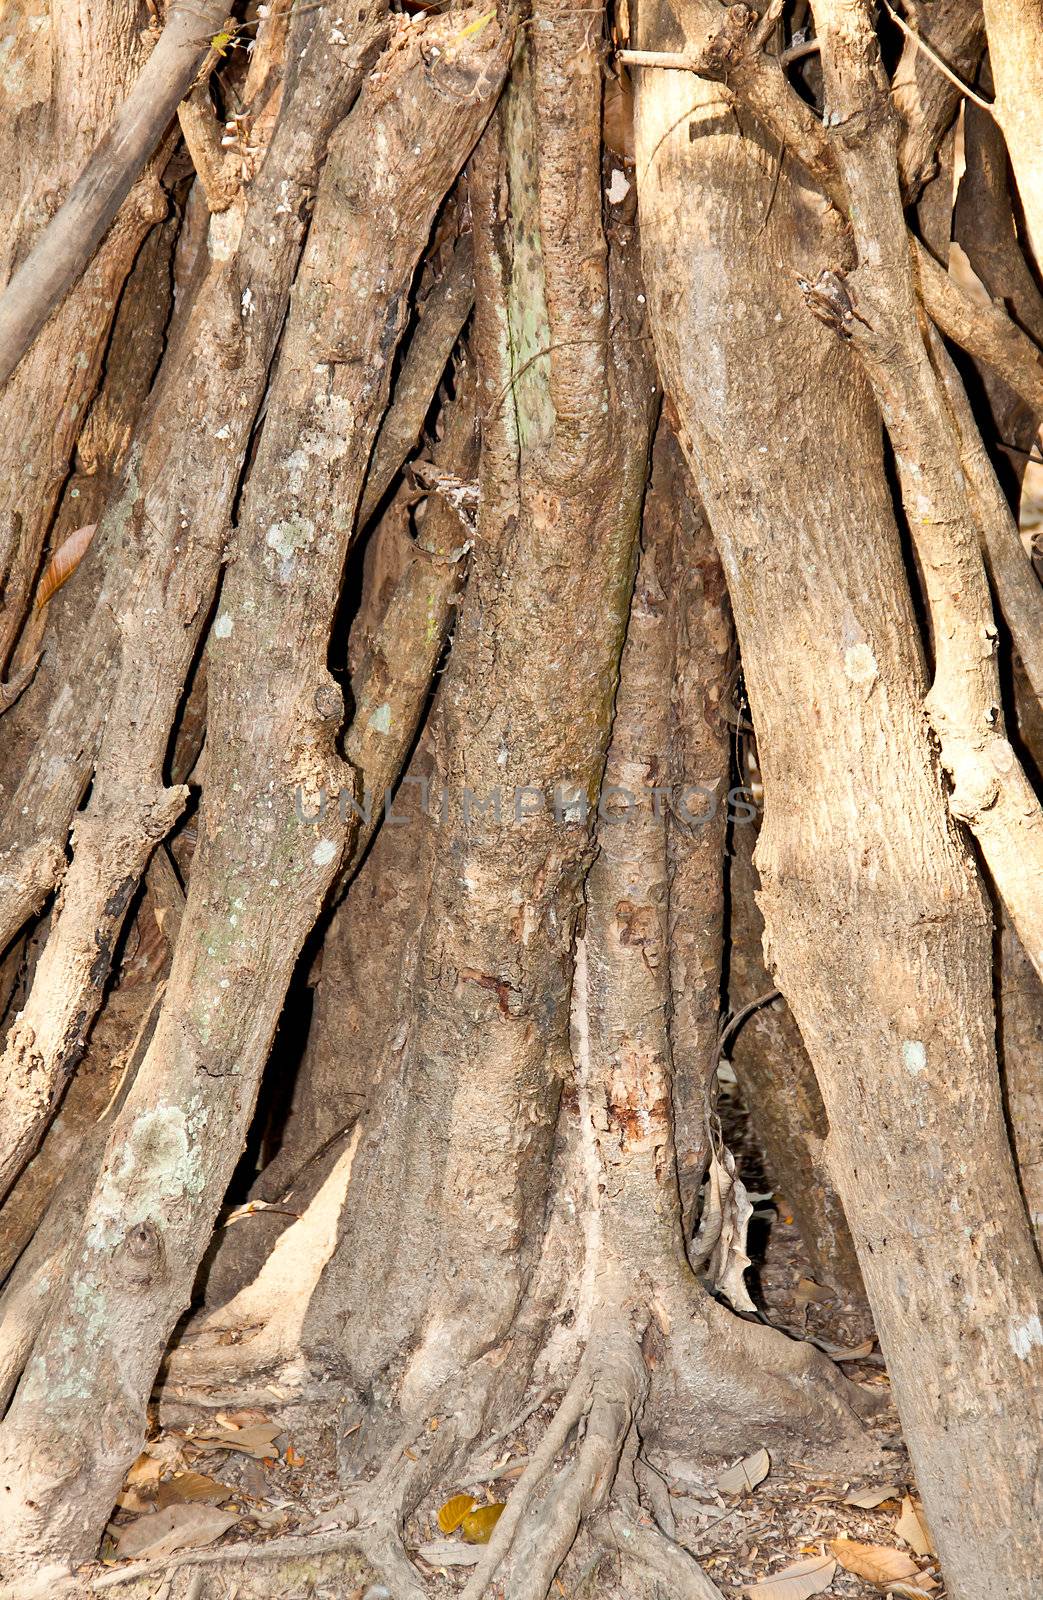 The walls of the tree root for background.